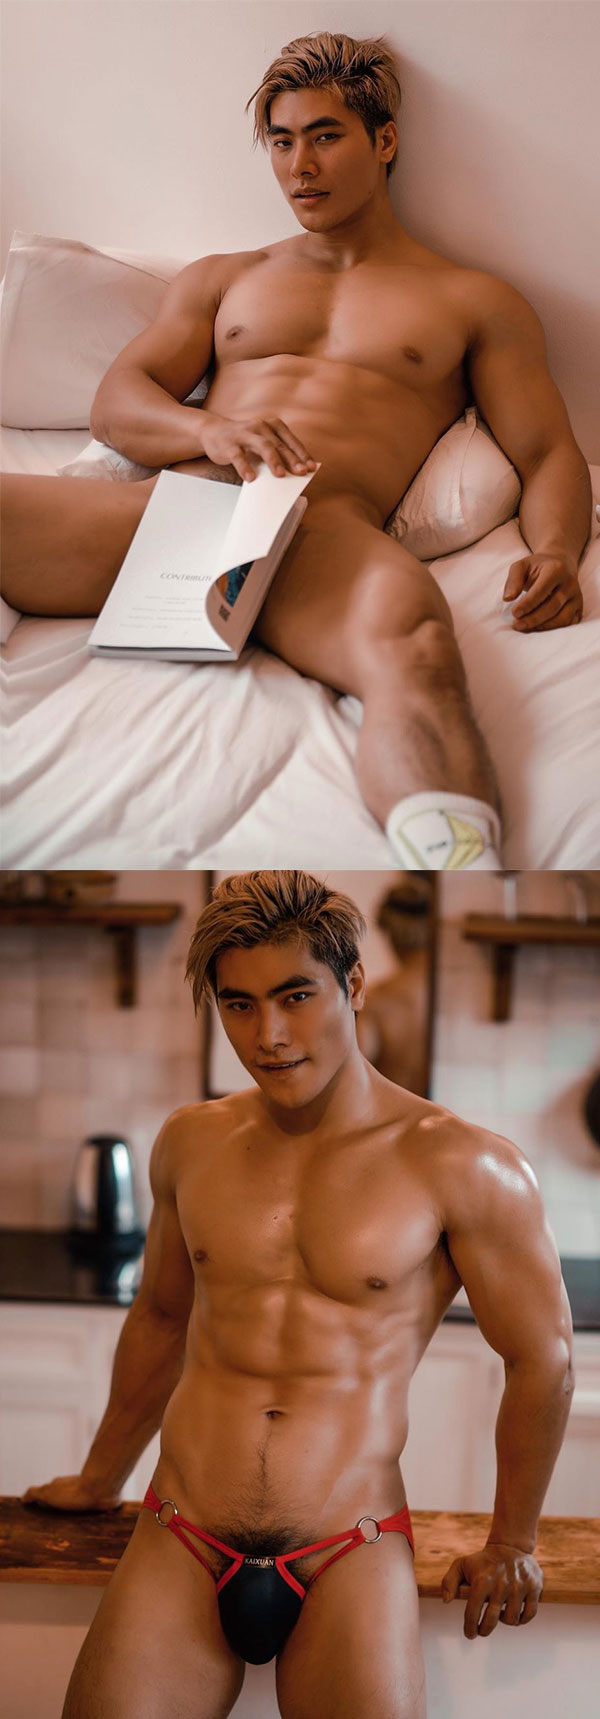 Another Perfect Chinese Man